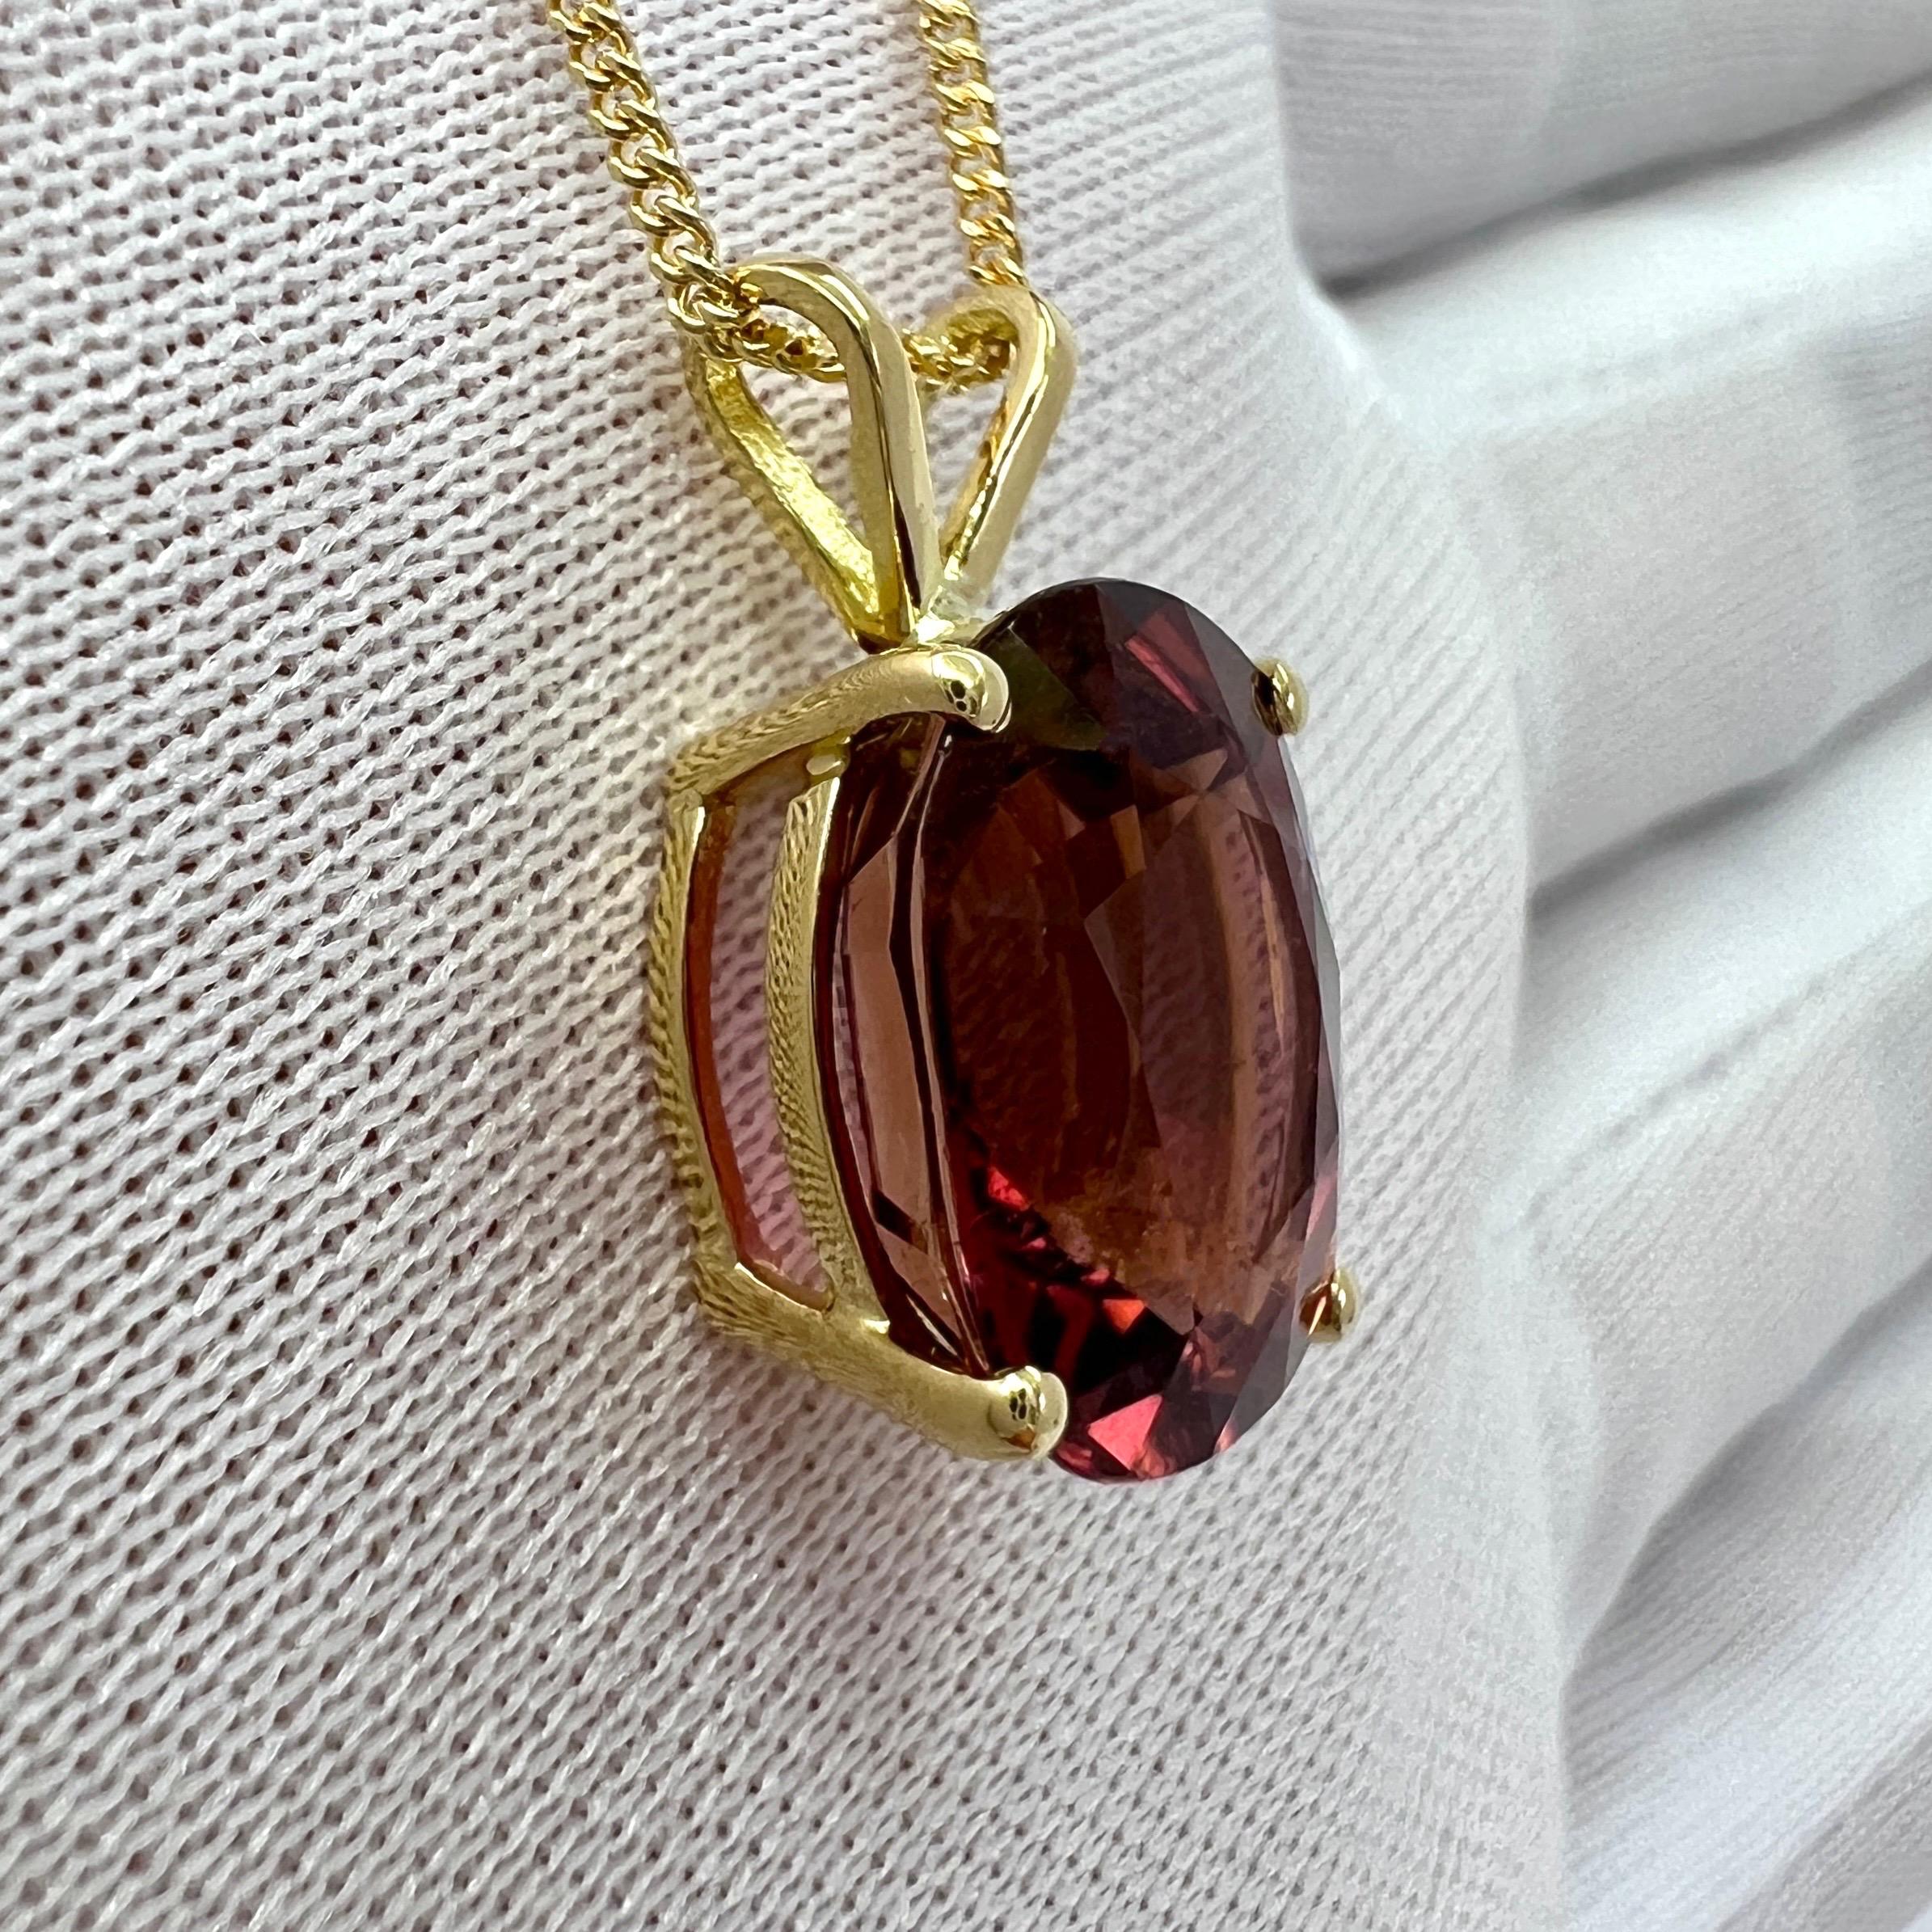 Women's or Men's 5.35ct Pink Orange Rubellite Tourmaline Oval 18k Yellow Gold Pendant Necklace For Sale